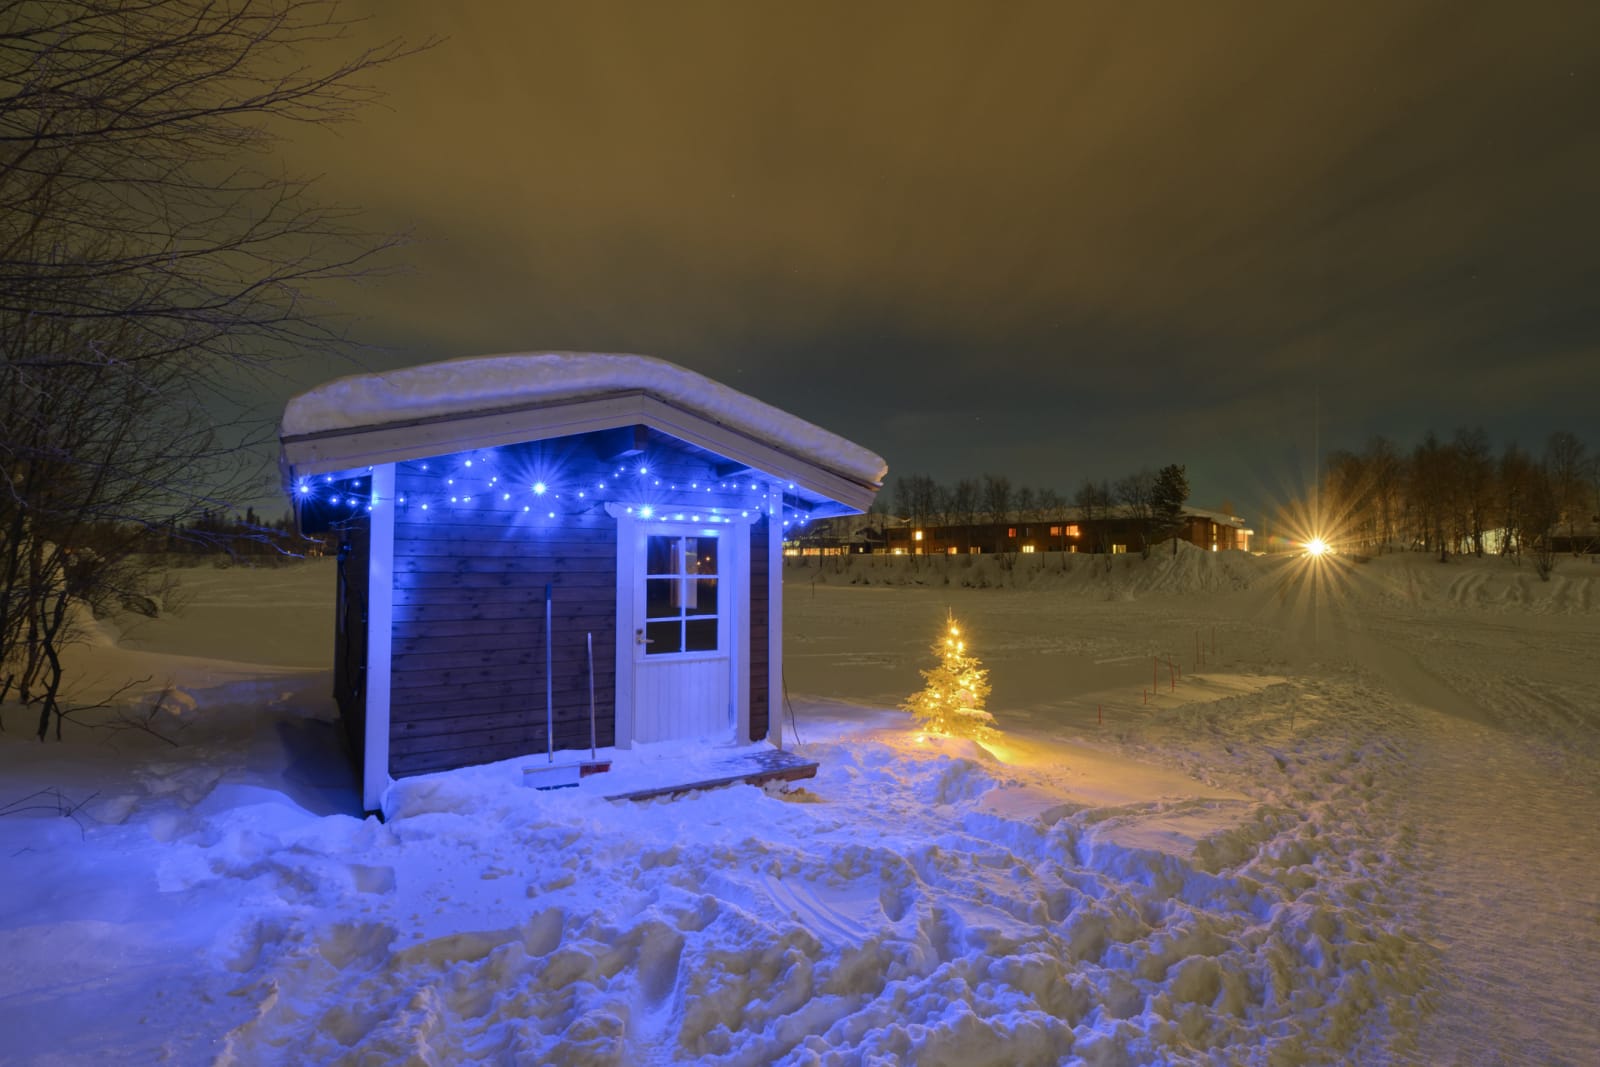 Sauna at night in the snow covered in lights